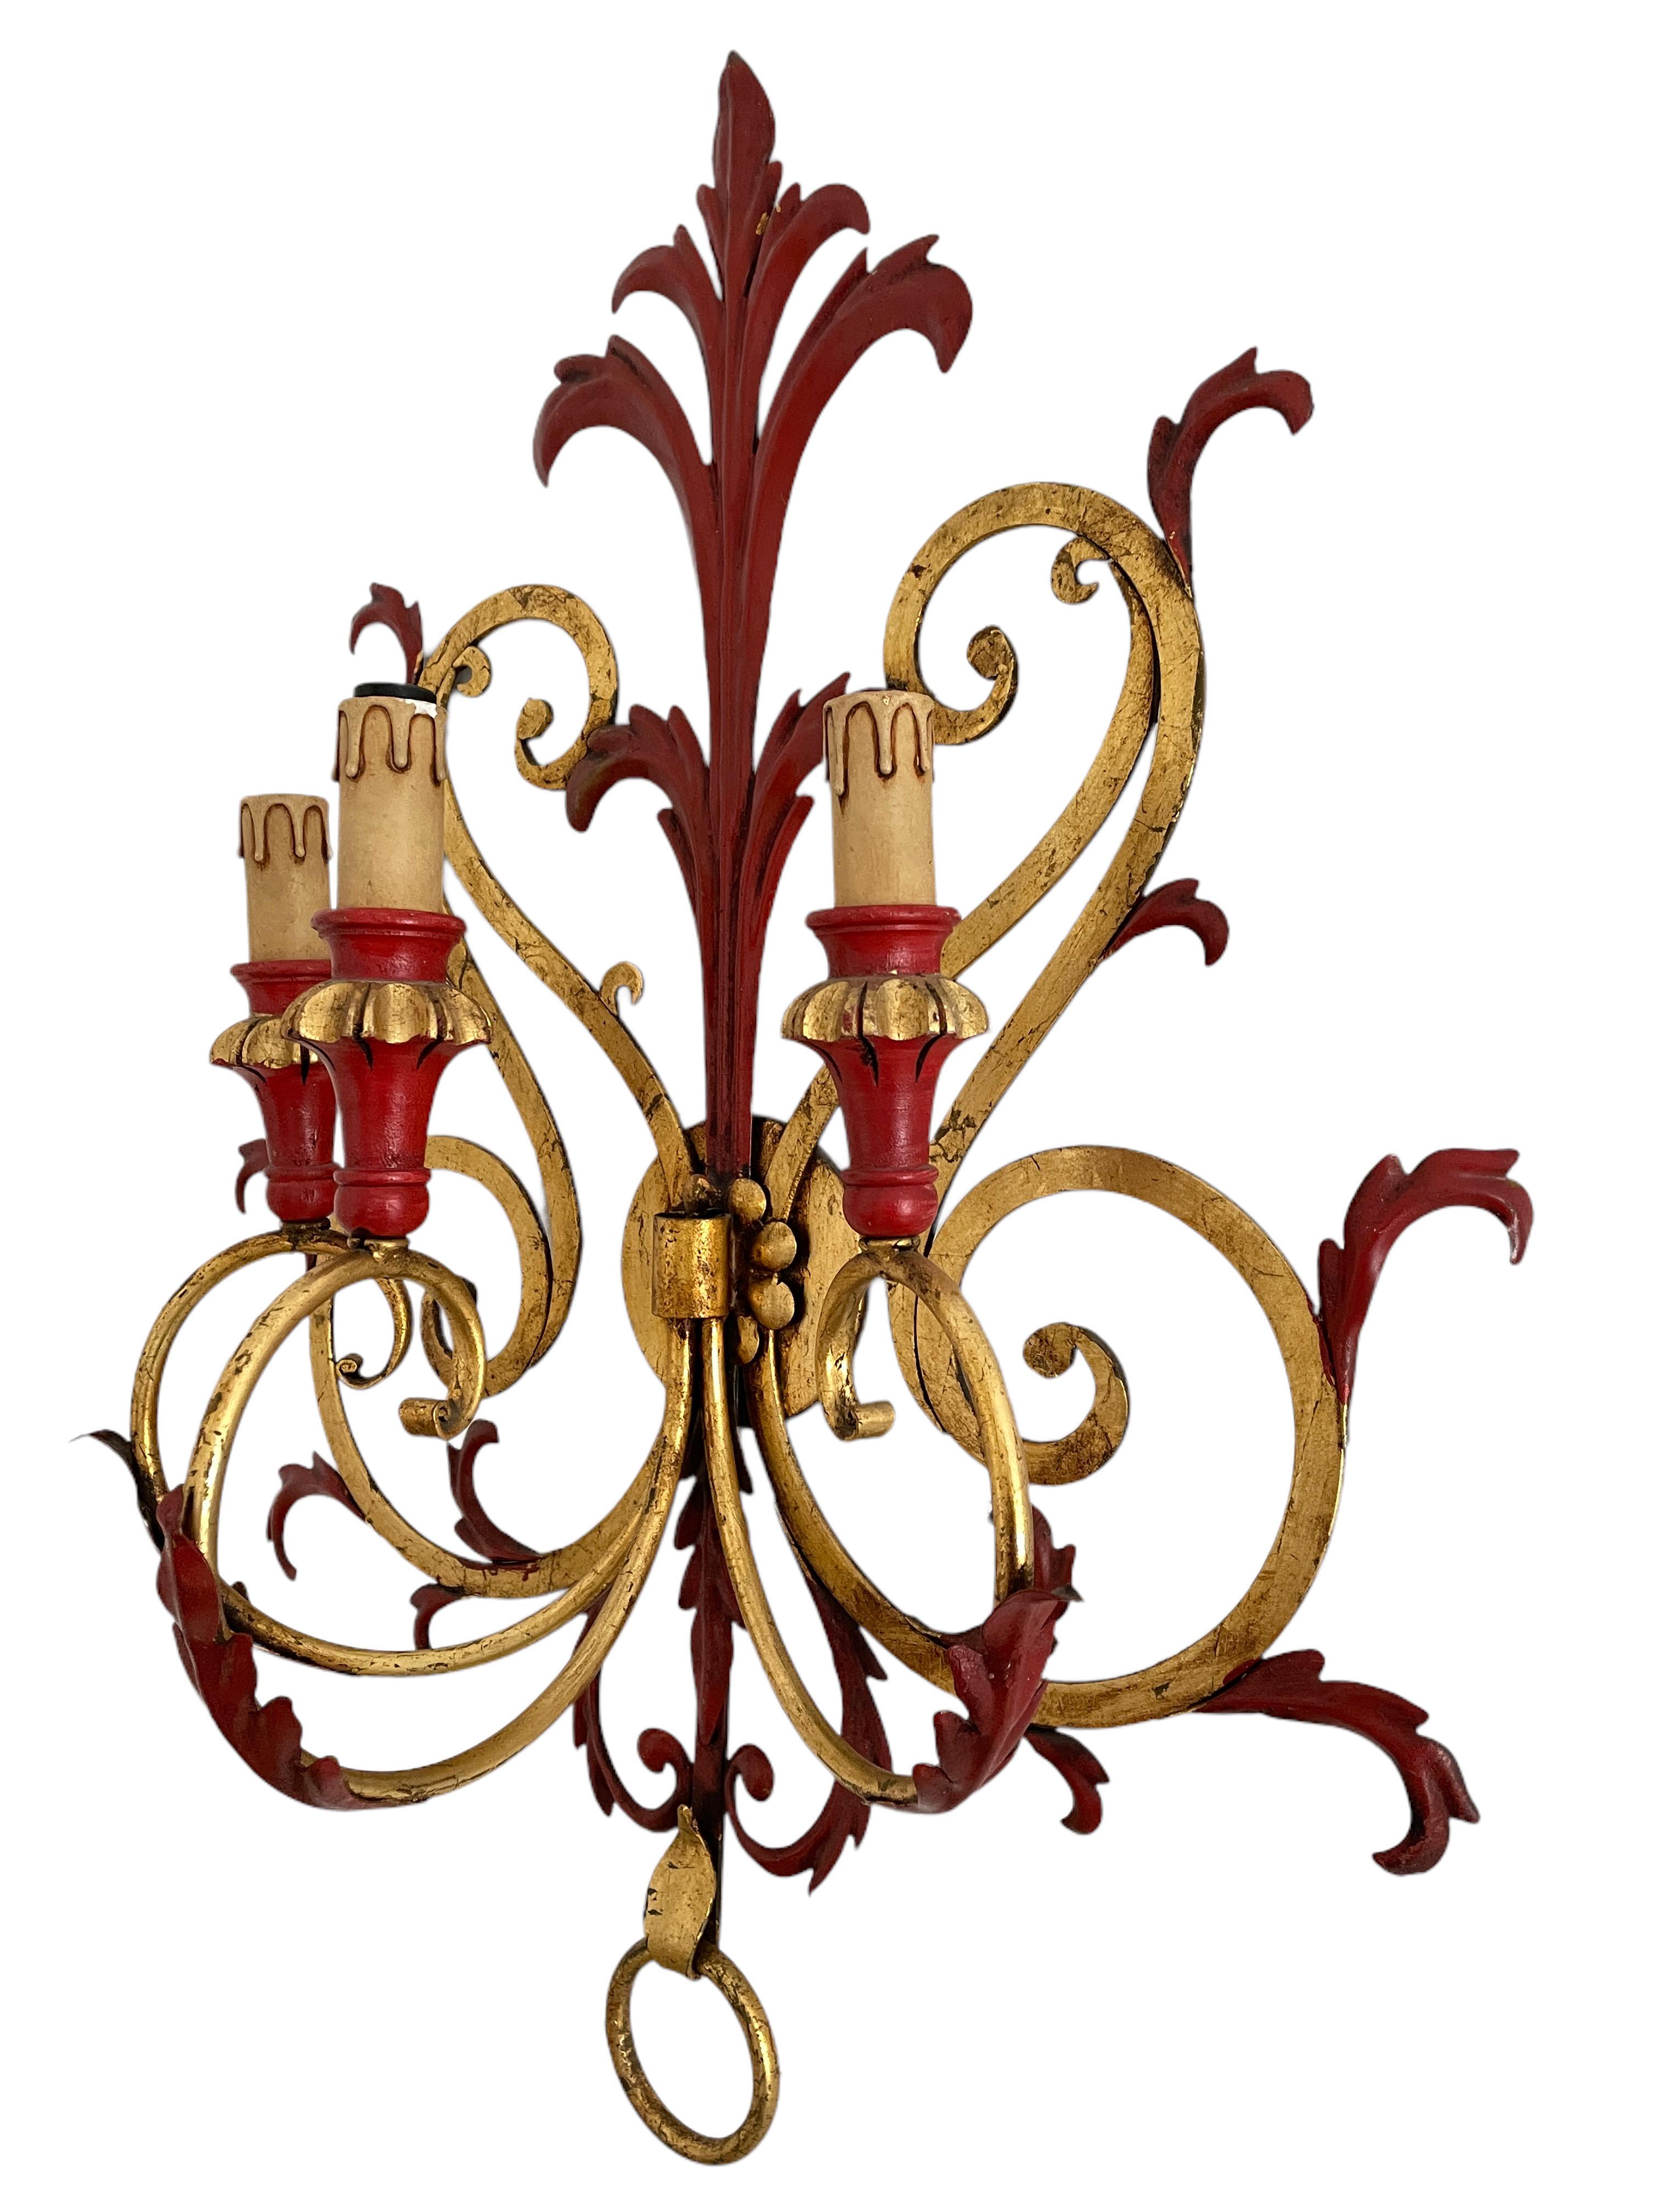 A single metal gilded and red colored toleware 3-light sconce. The fixture requires three European E14 candelabra bulbs, each bulb up to 40 watts. The wall light has a beautiful color and gives each room an eclectic statement. Light bulbs are not